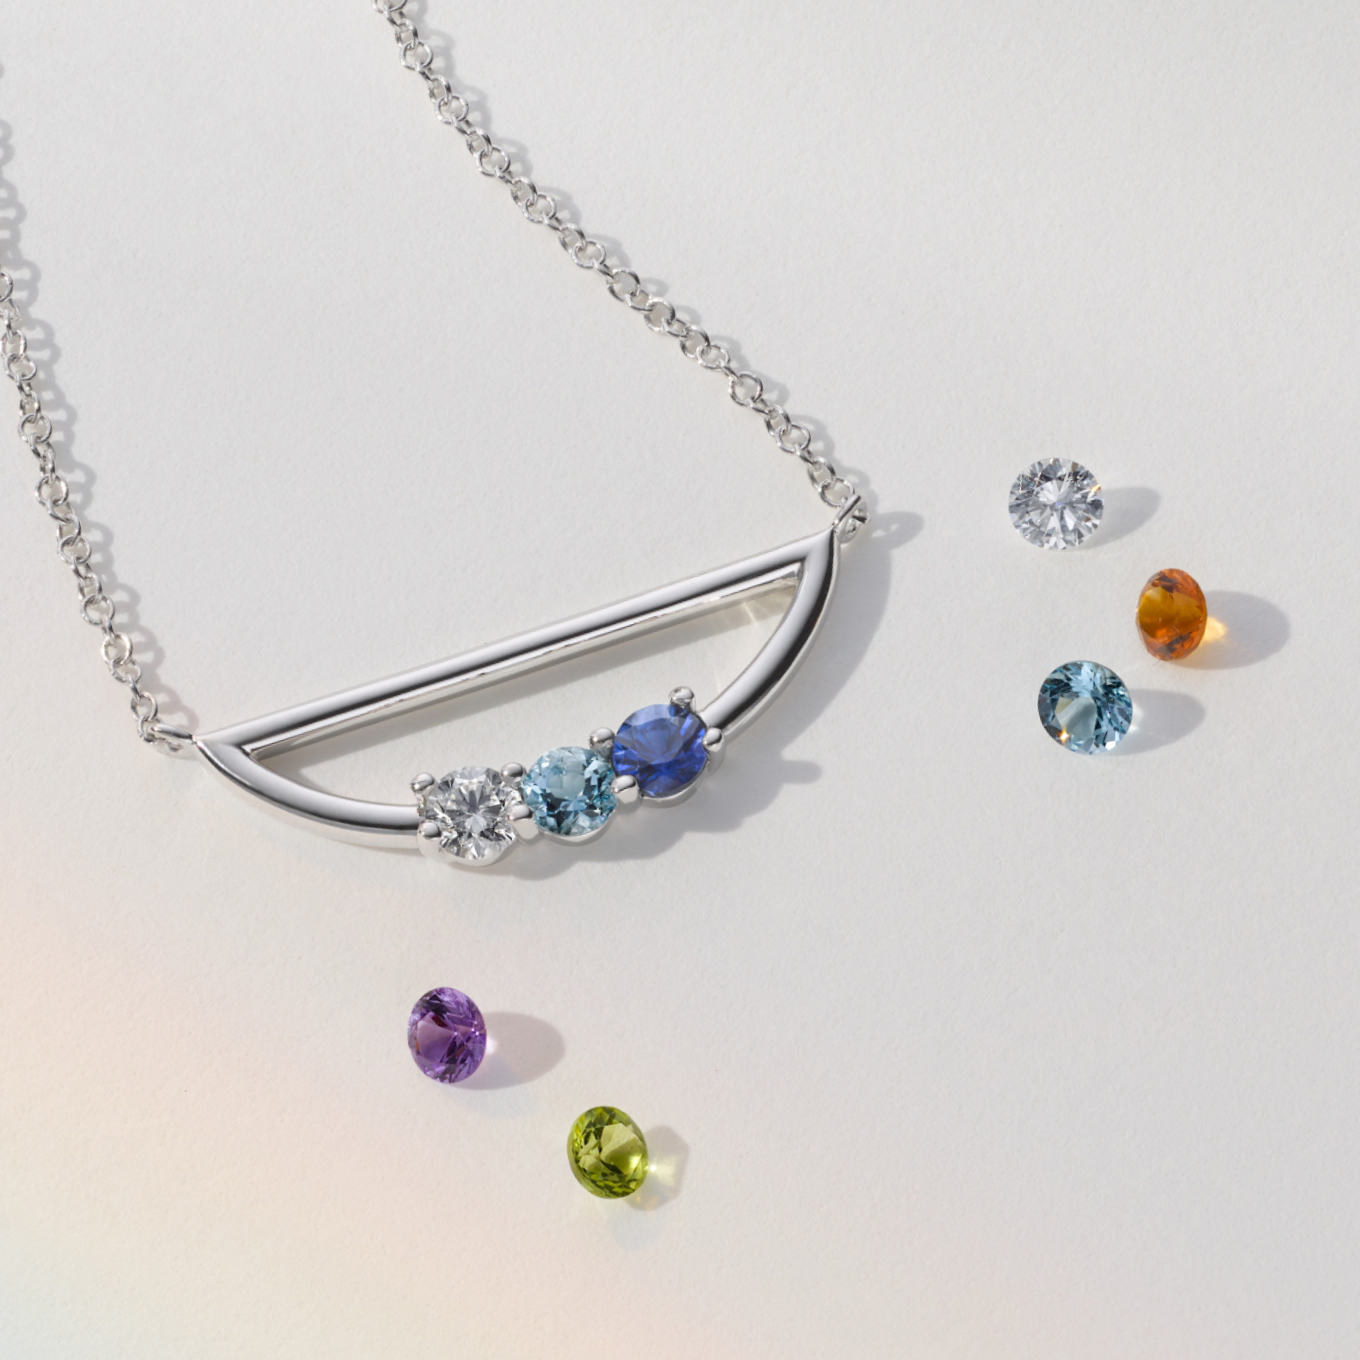 From birthstones to favorite colors, add the three round gemstones of your choice to this 14-karat white gold necklace for a meaningful gift or beautiful everyday accessory. It features a stylish curved design and comes on an adjustable rolo chain with a lobster clasp for worry-free wear.